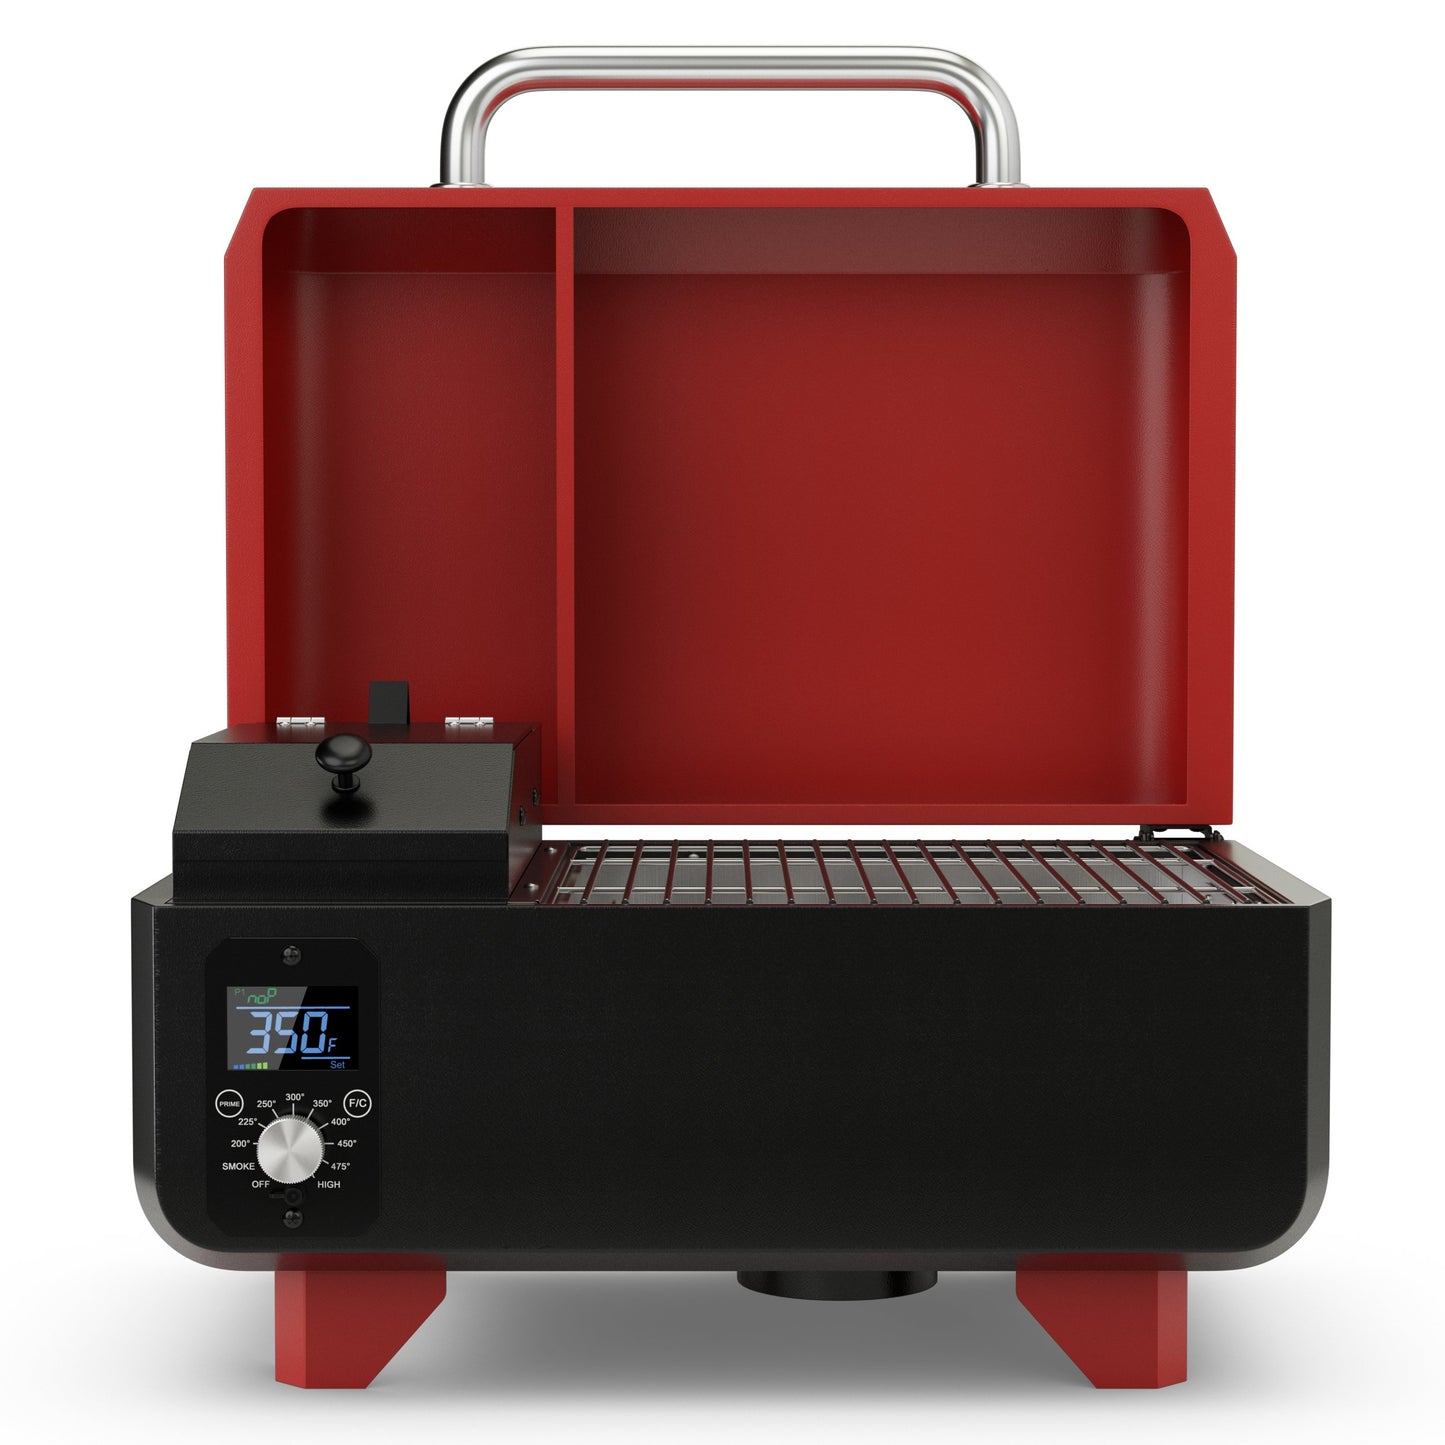 Outdoor Portable Tabletop Pellet Grill and Smoker with Digital Control System for BBQ, Red